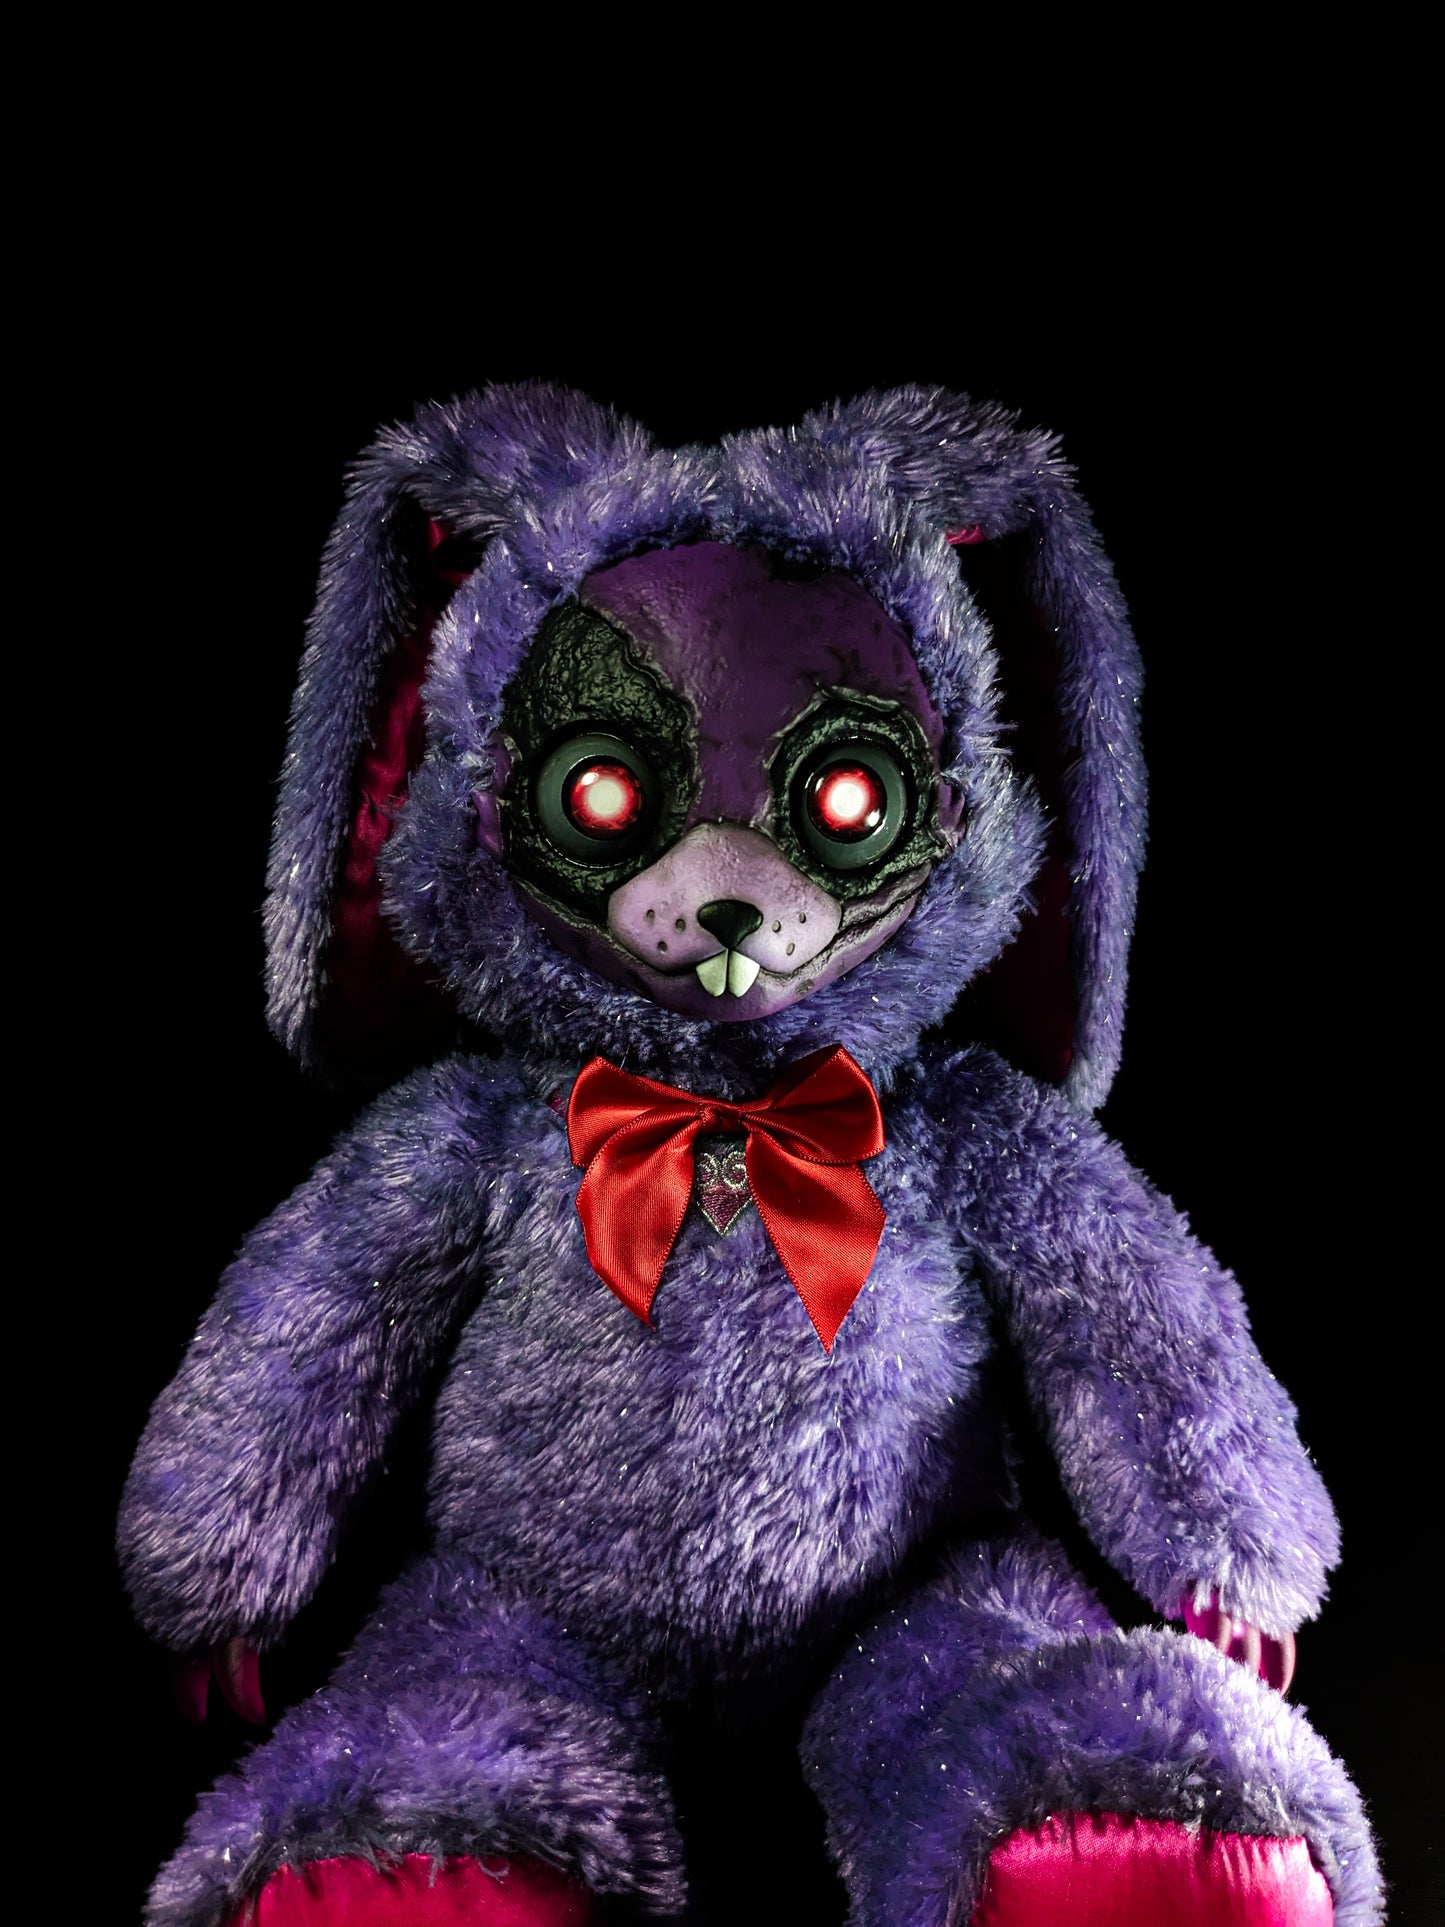 Withered Bonnie: FREDBEARZ - Five Nights at Freddy's Inspired CRYPTCRITZ